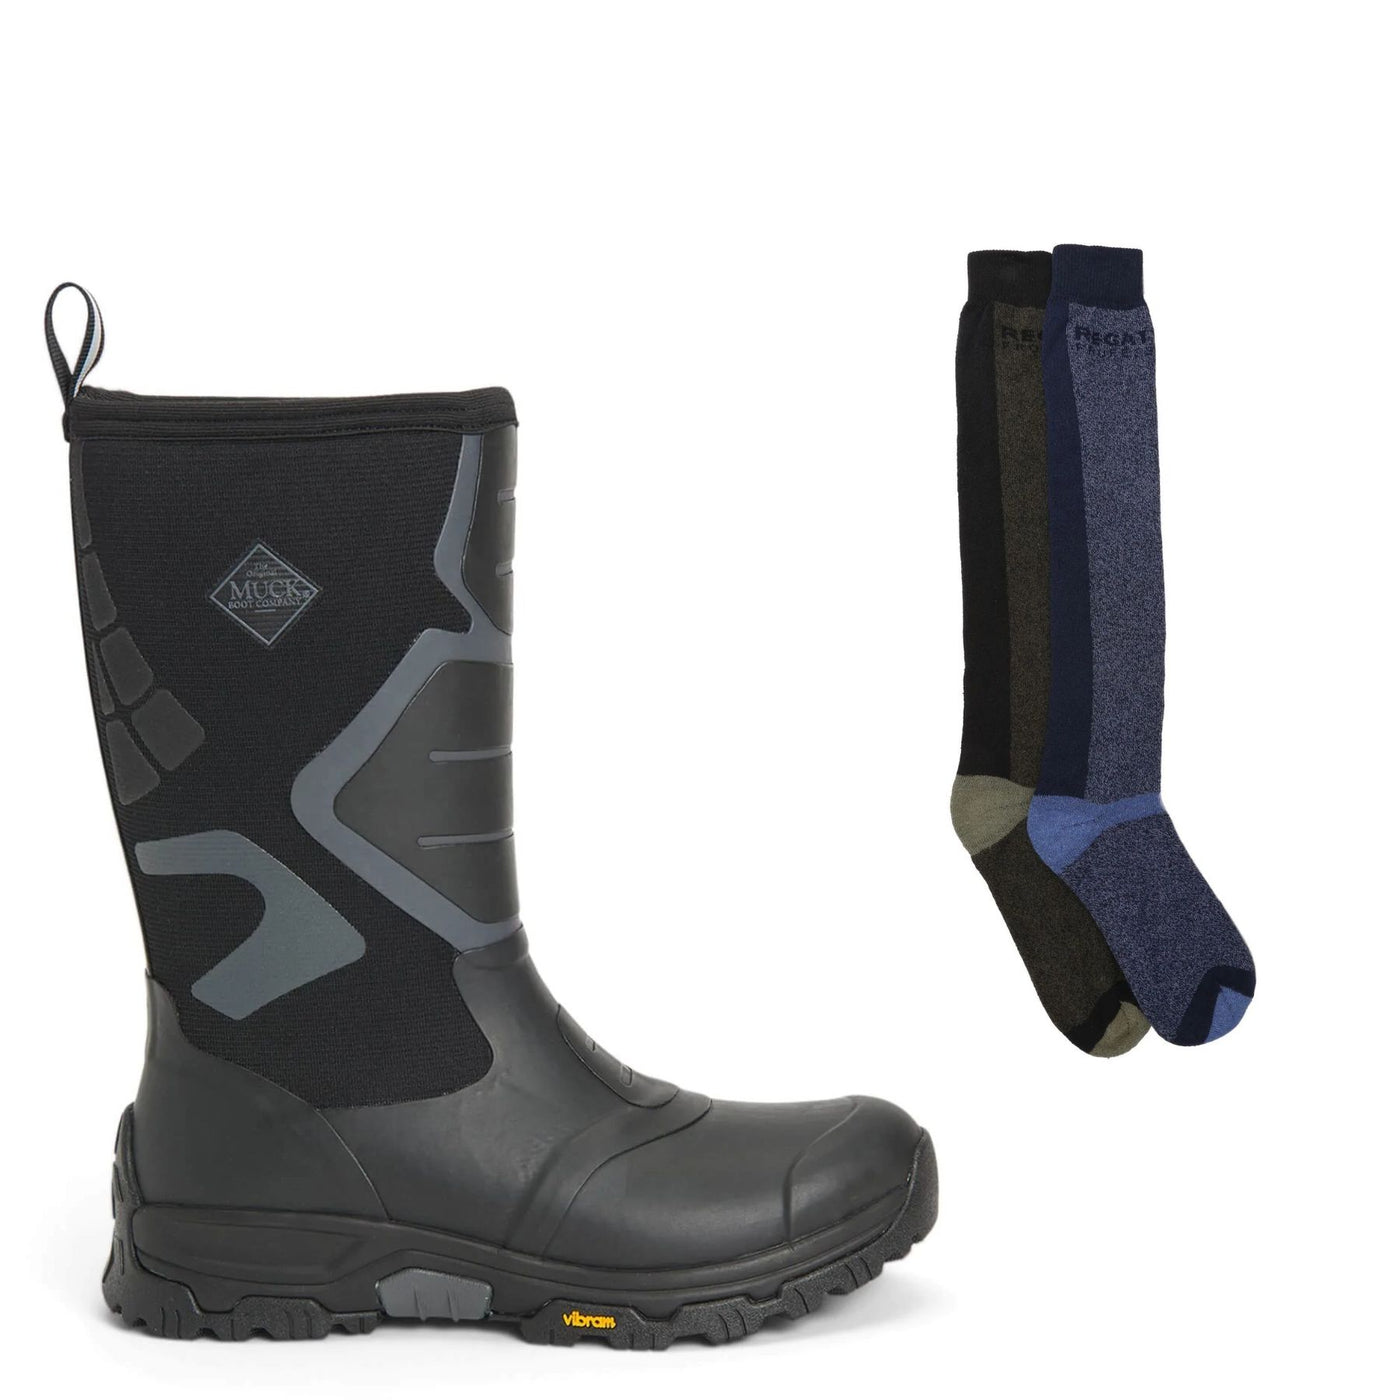 Muck Boots Apex Special Offer Pack - Wellies + 2 Pairs Welly Socks